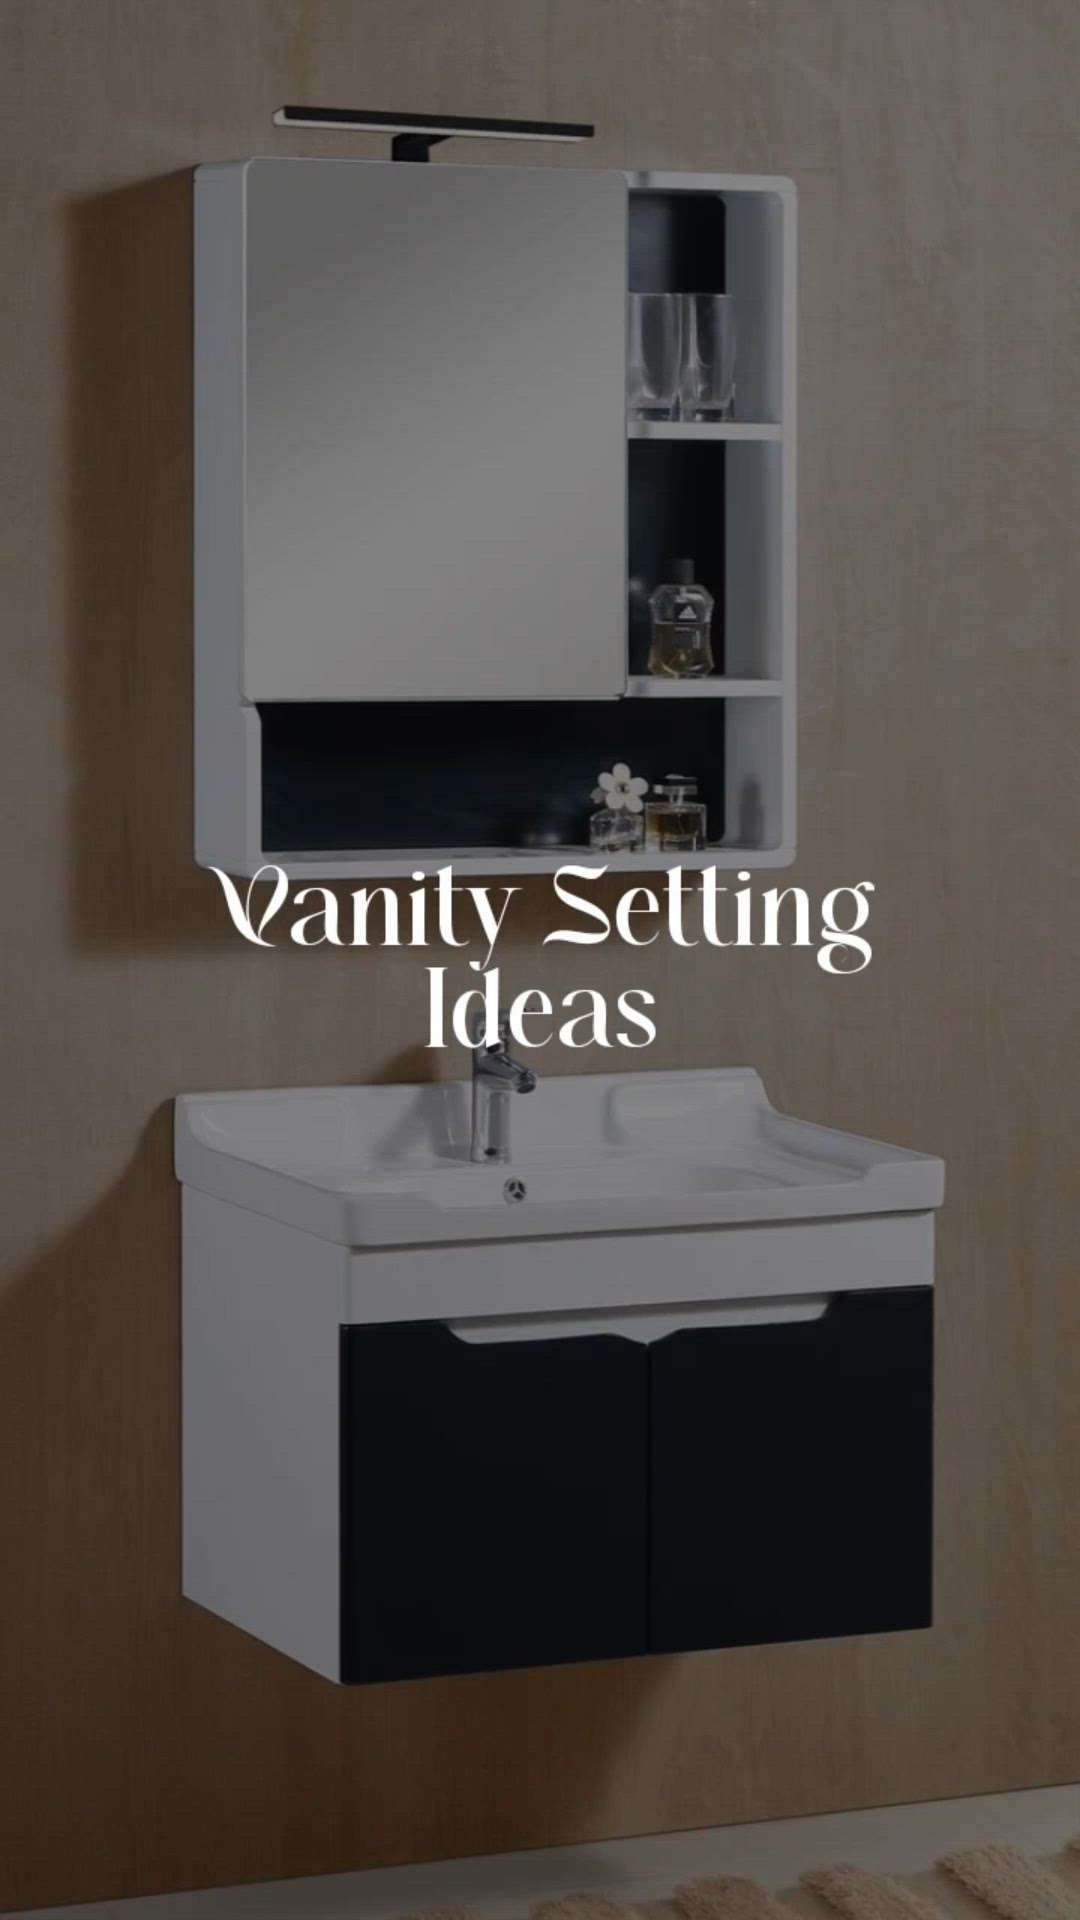 PARRYWARE VANITY CABINET 
MATERIAL: MDF ( MEDIUM DENSITY FIBERBOARD )
TYPE: WALL HUNG
VANITY CABINET WITH CENTRAL WASHBASIN & FAUCET POINT, SOFT CLOSE DOORS, SUFFICIENT SPACEFOR STORING PRODUCTS, SPACESAVING SUSTAINABLE PRODUCTFORA GOOD LOOKING WASH AREA OR BATHROOM.

 #Parryware #vanity #cabinet #sanitaryshopping #koloapp #bestprice #basin  #faucet #sanitarywares #washarea #racks #cabinets #longlasting